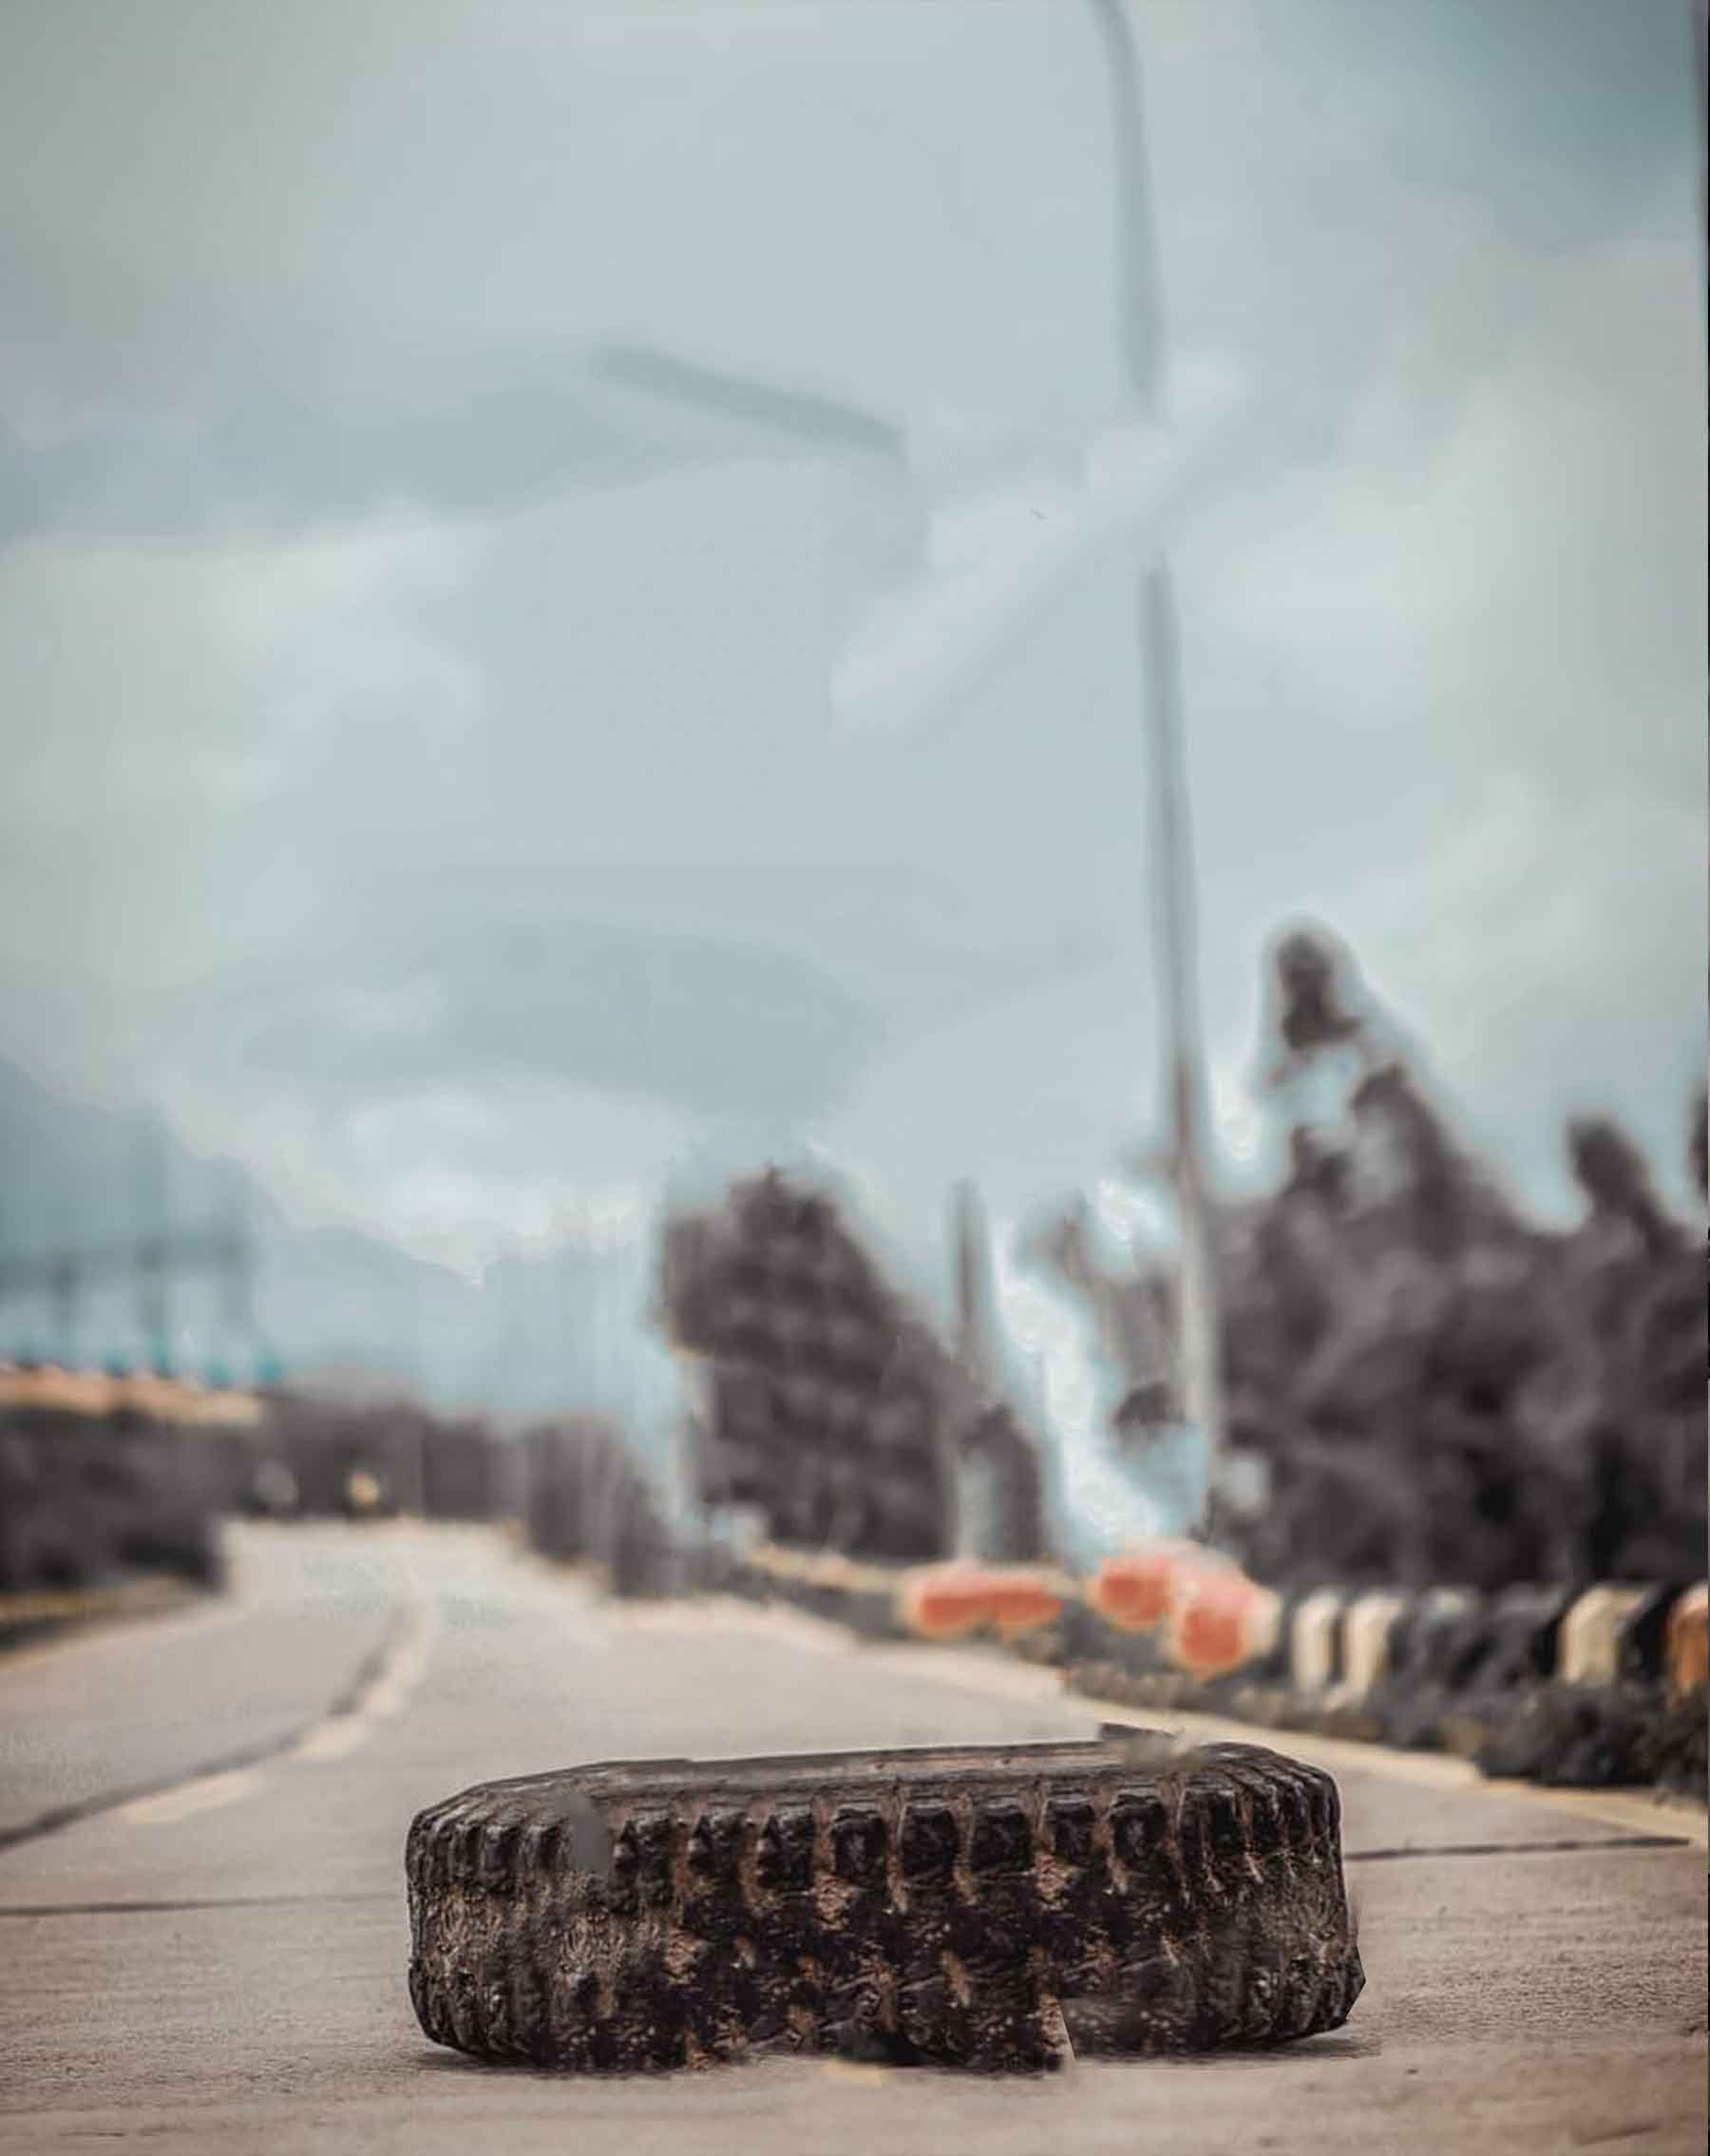 Details 100 tyre background for editing